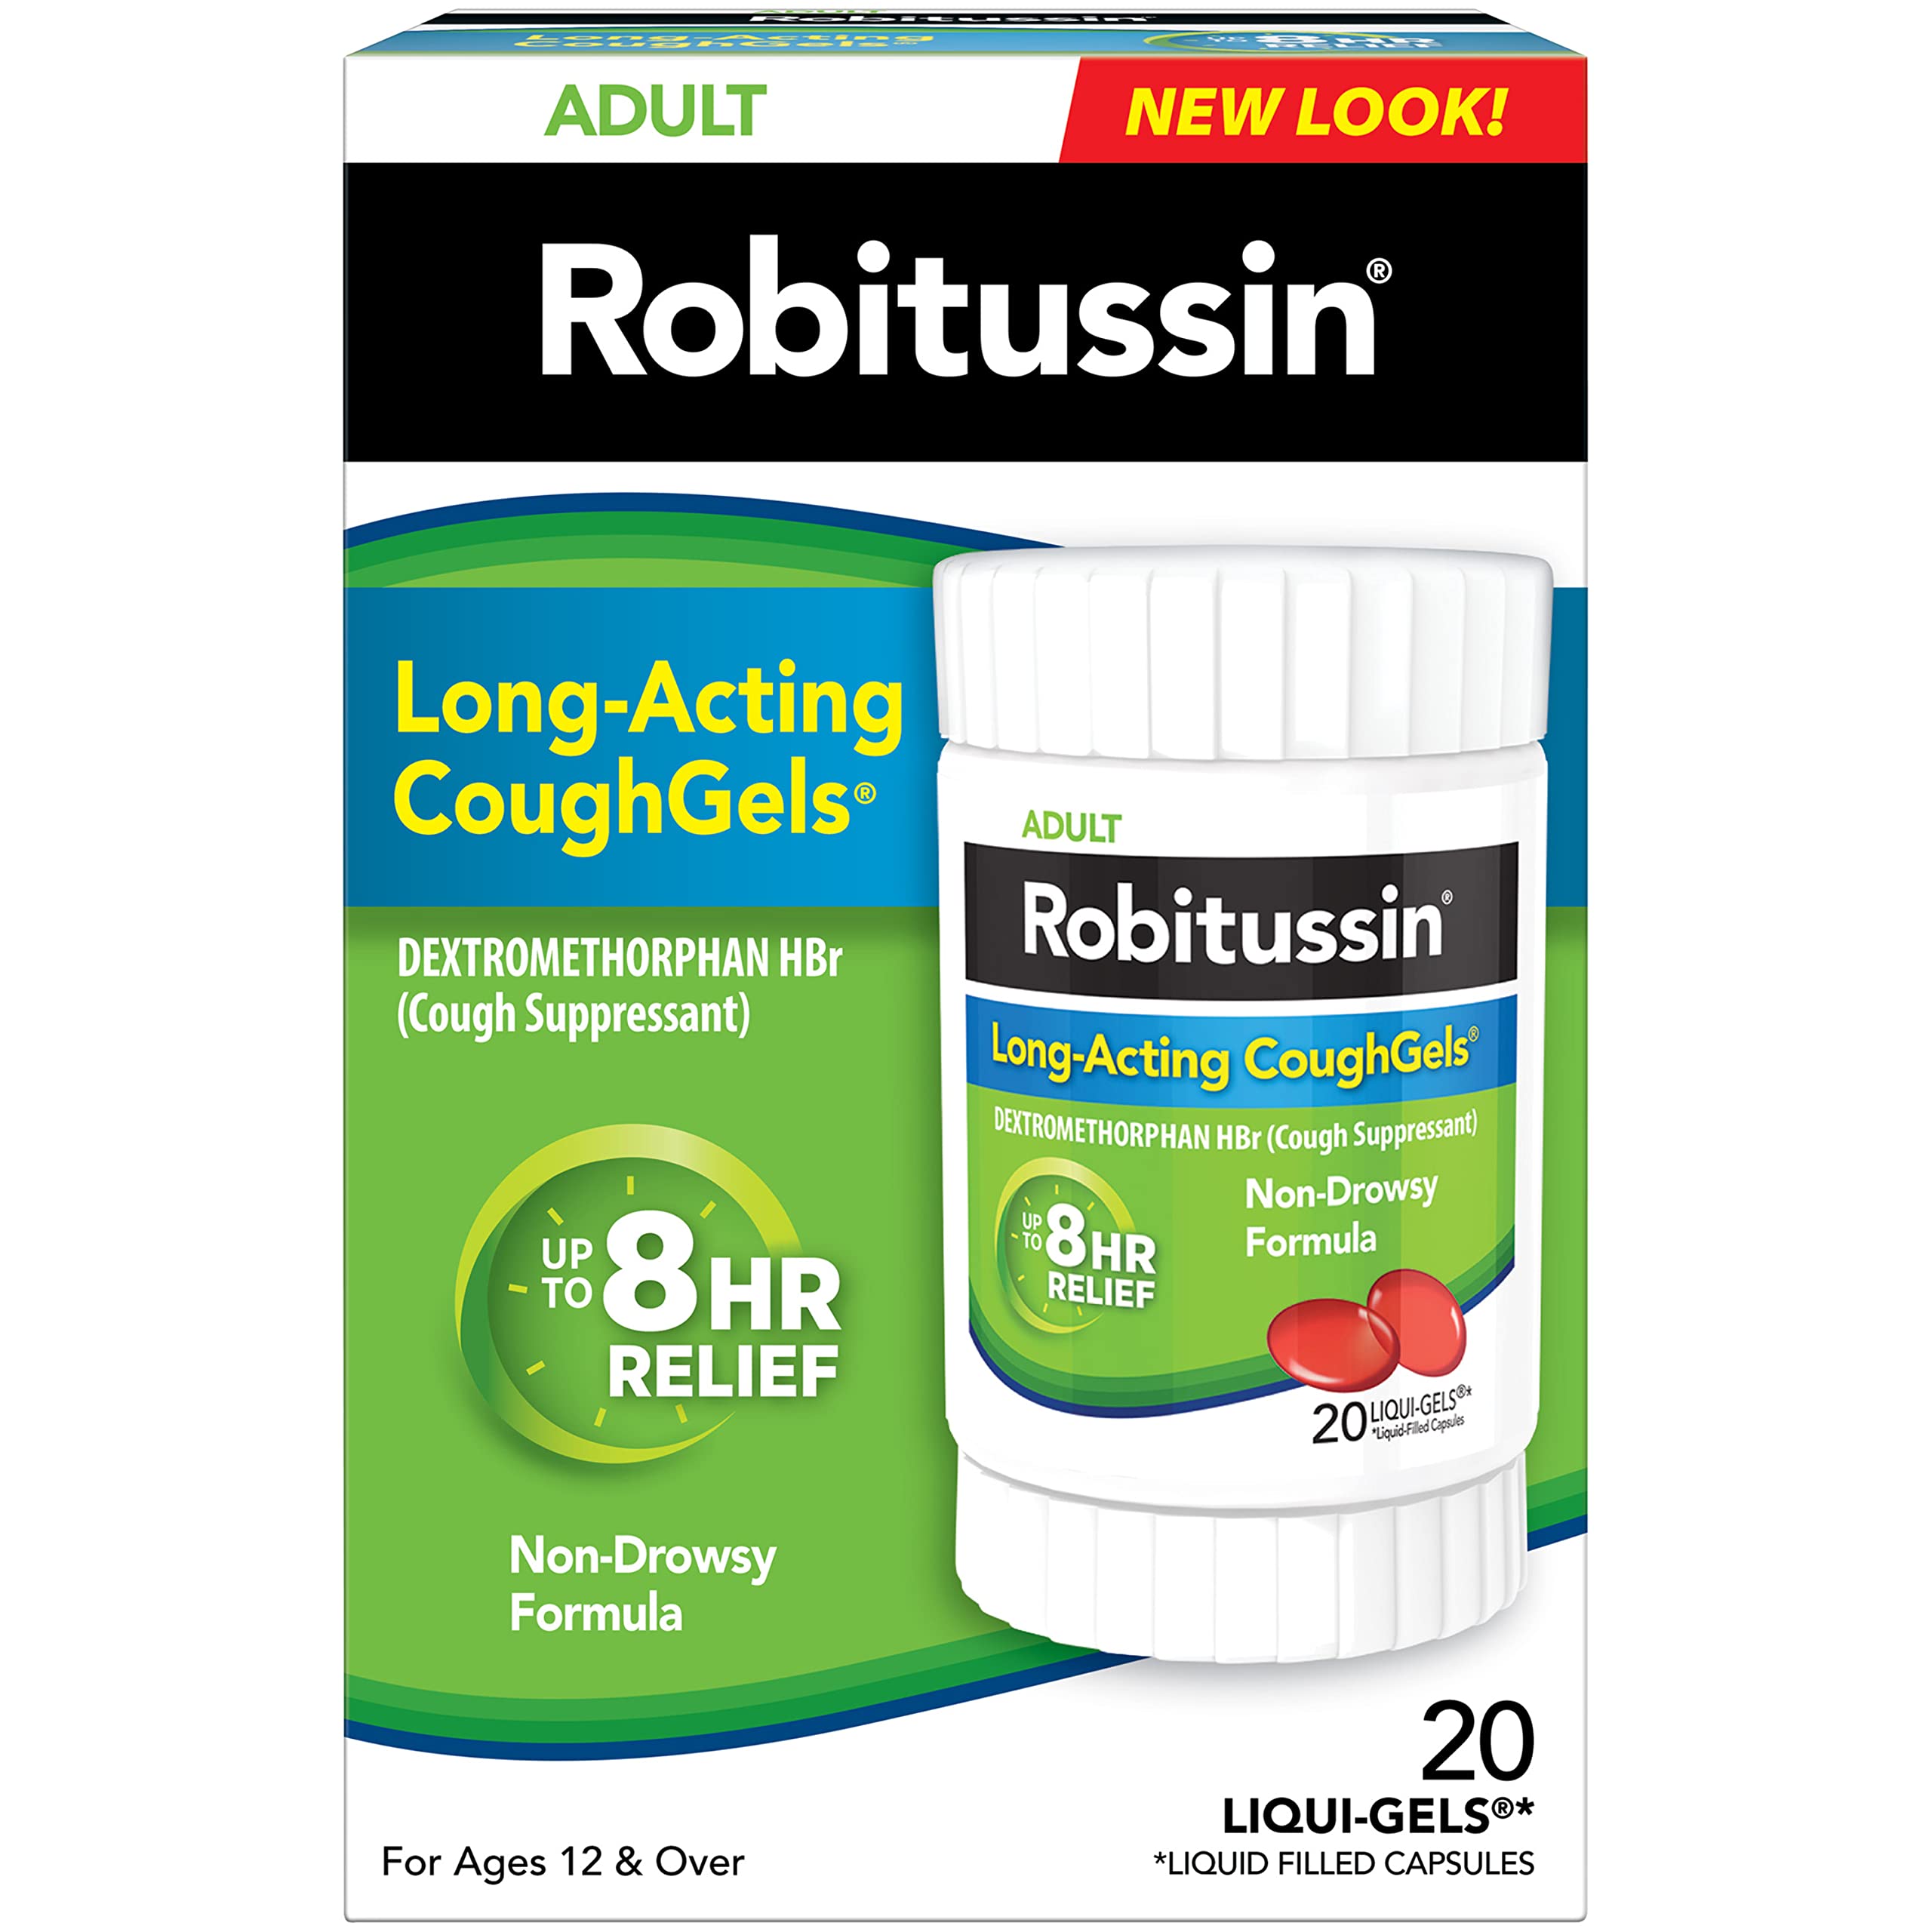 Robitussin Long-Acting CoughGels, Cough Medicine for Adults and Children 12 Years and Older - 20 Liqui-Gels